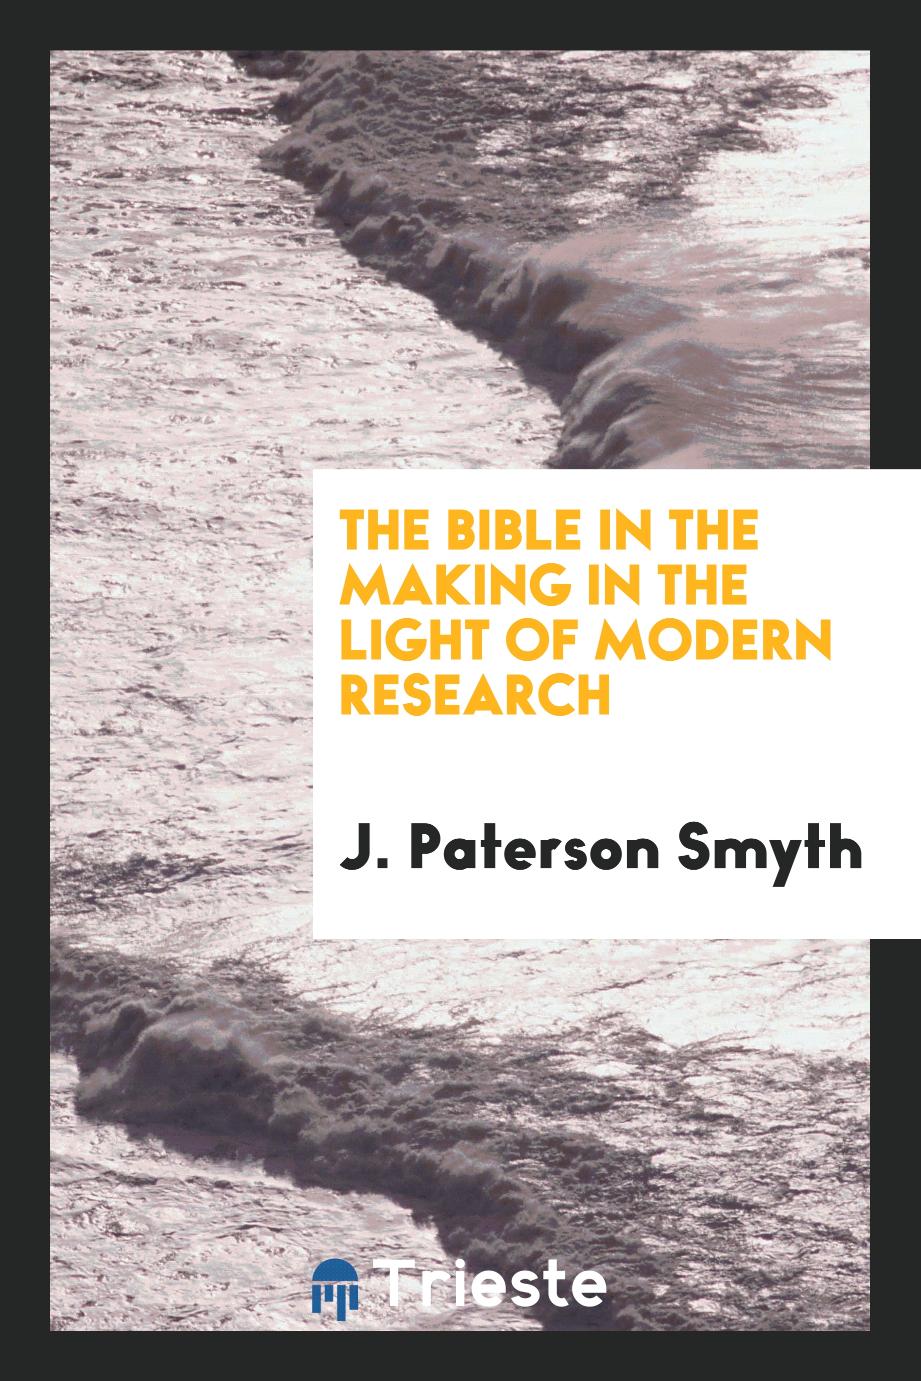 The Bible in the making in the light of modern research